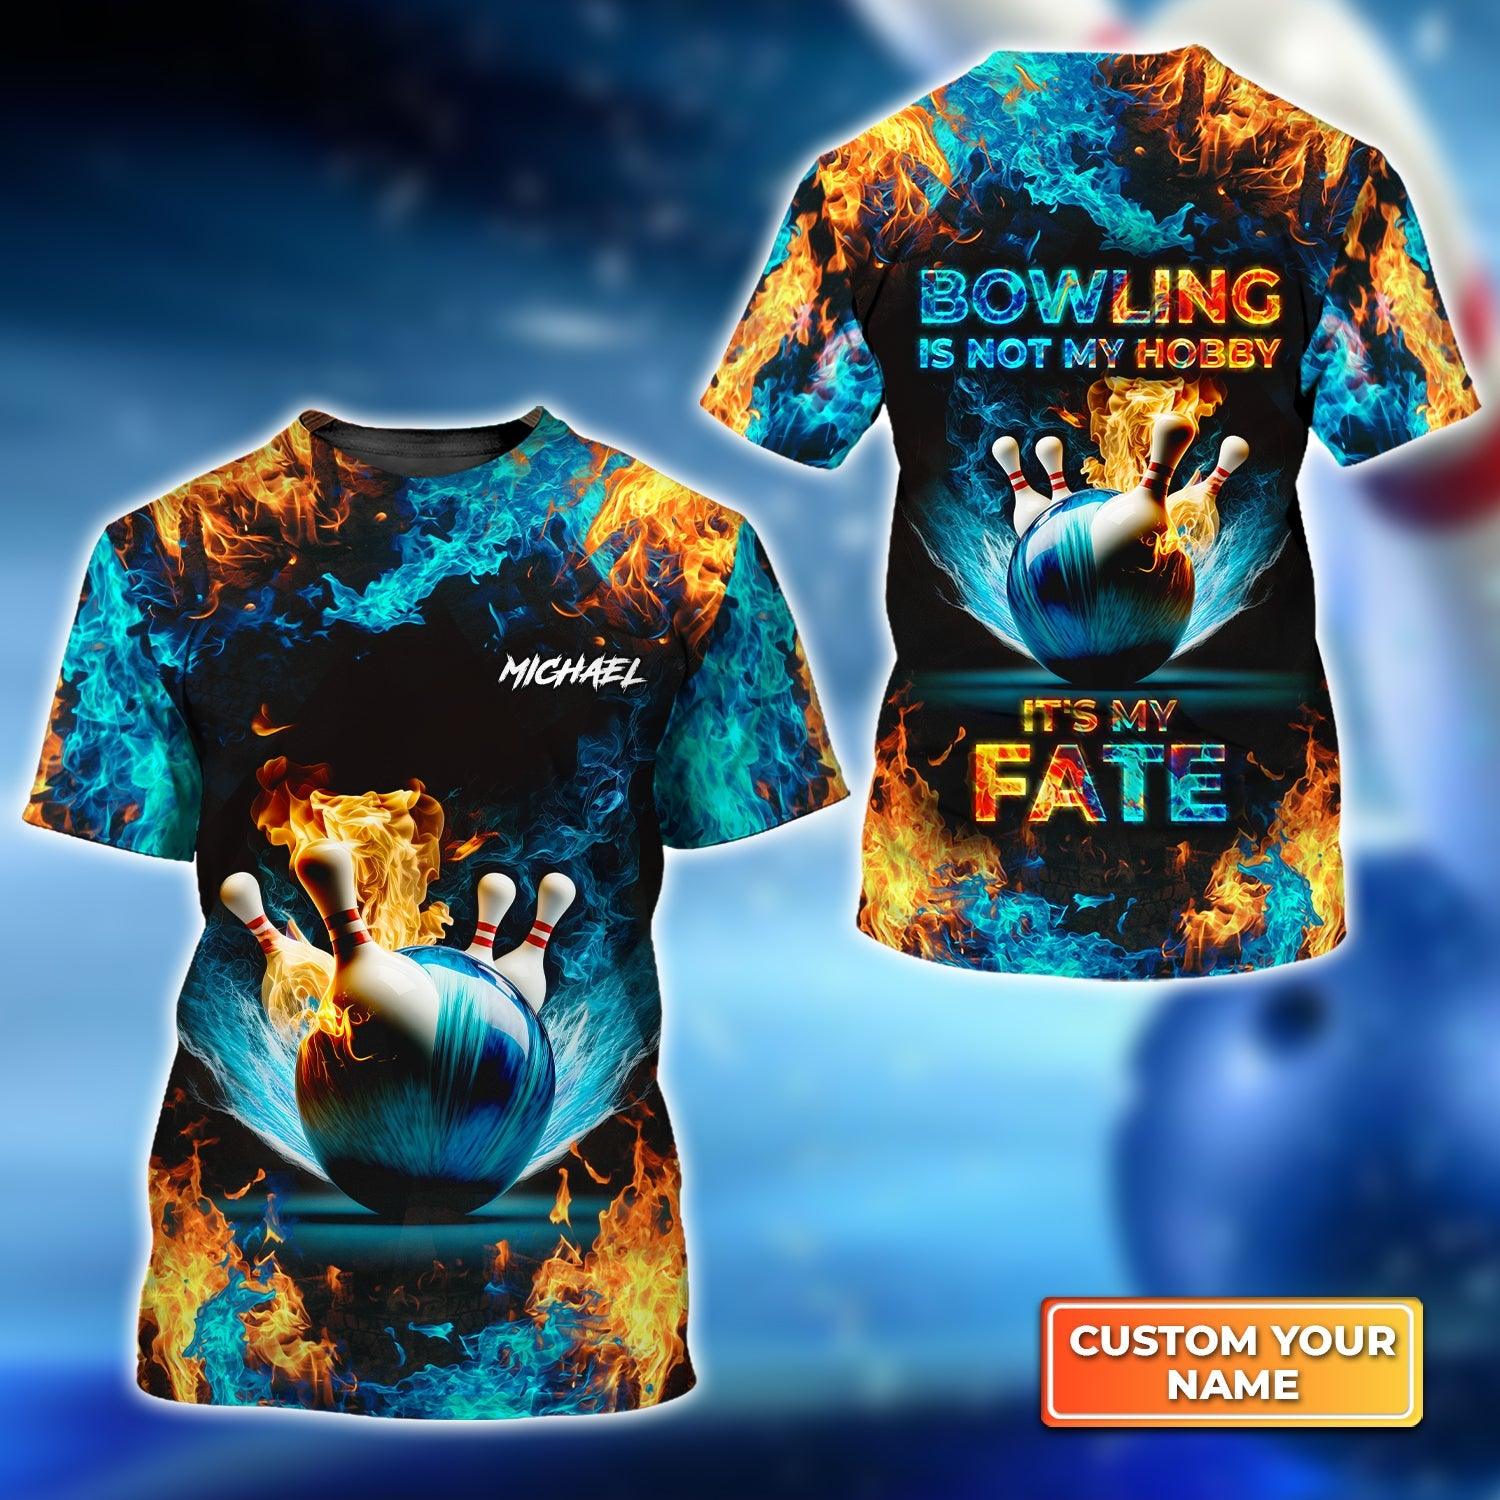 Bowling Custom Name T Shirt, Blue Bowling Ball And Pins On Fire, Bowling Is Not My Hobby It's My Fate Personalized T-Shirt For Men, Gift For Bowlers - Amzanimalsgift